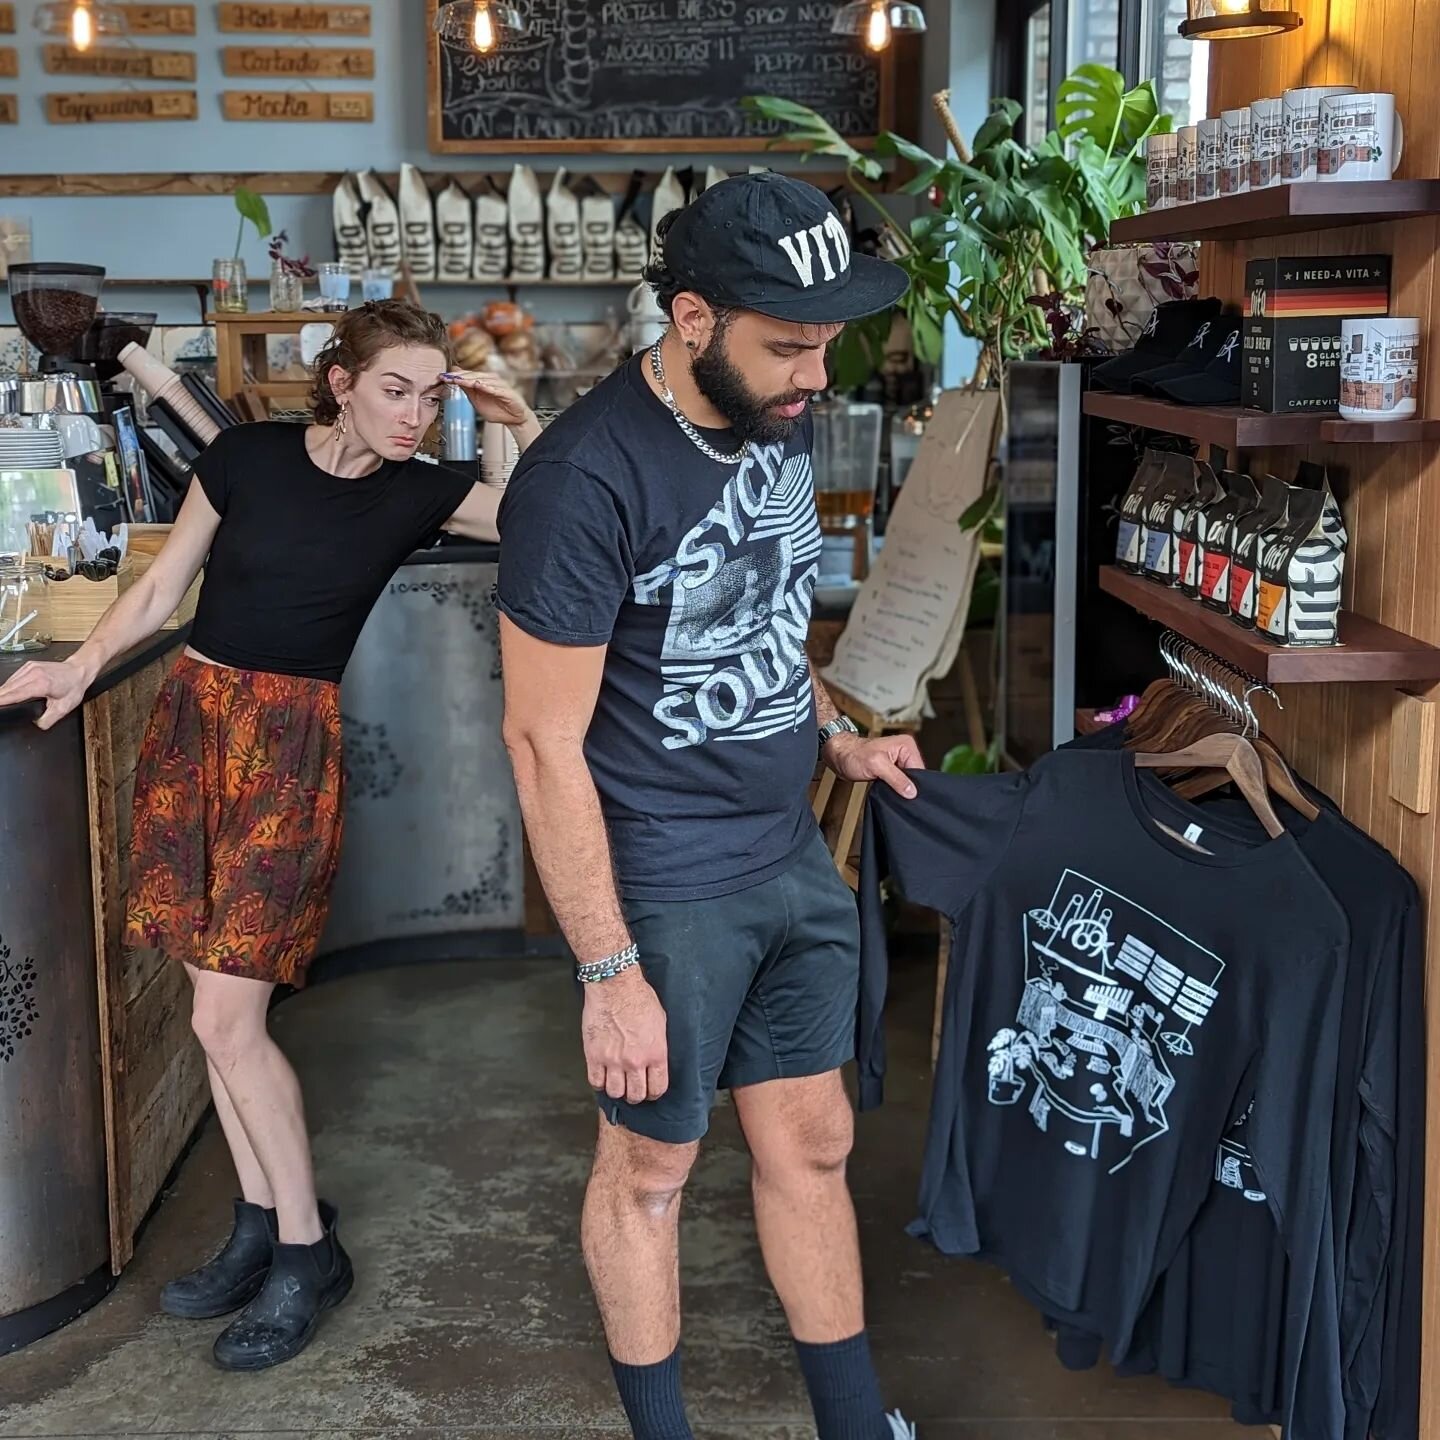 📸 Drama Unfolds at the Counter 🎭

Scene 1: Barista Soli curiously eyes the newly coveted Nook shirts in the distance. Meanwhile, Barista Joel gazes in wonderment as he sets his sights on the sleek, comfy black long-sleeve shirt, longing to liberate